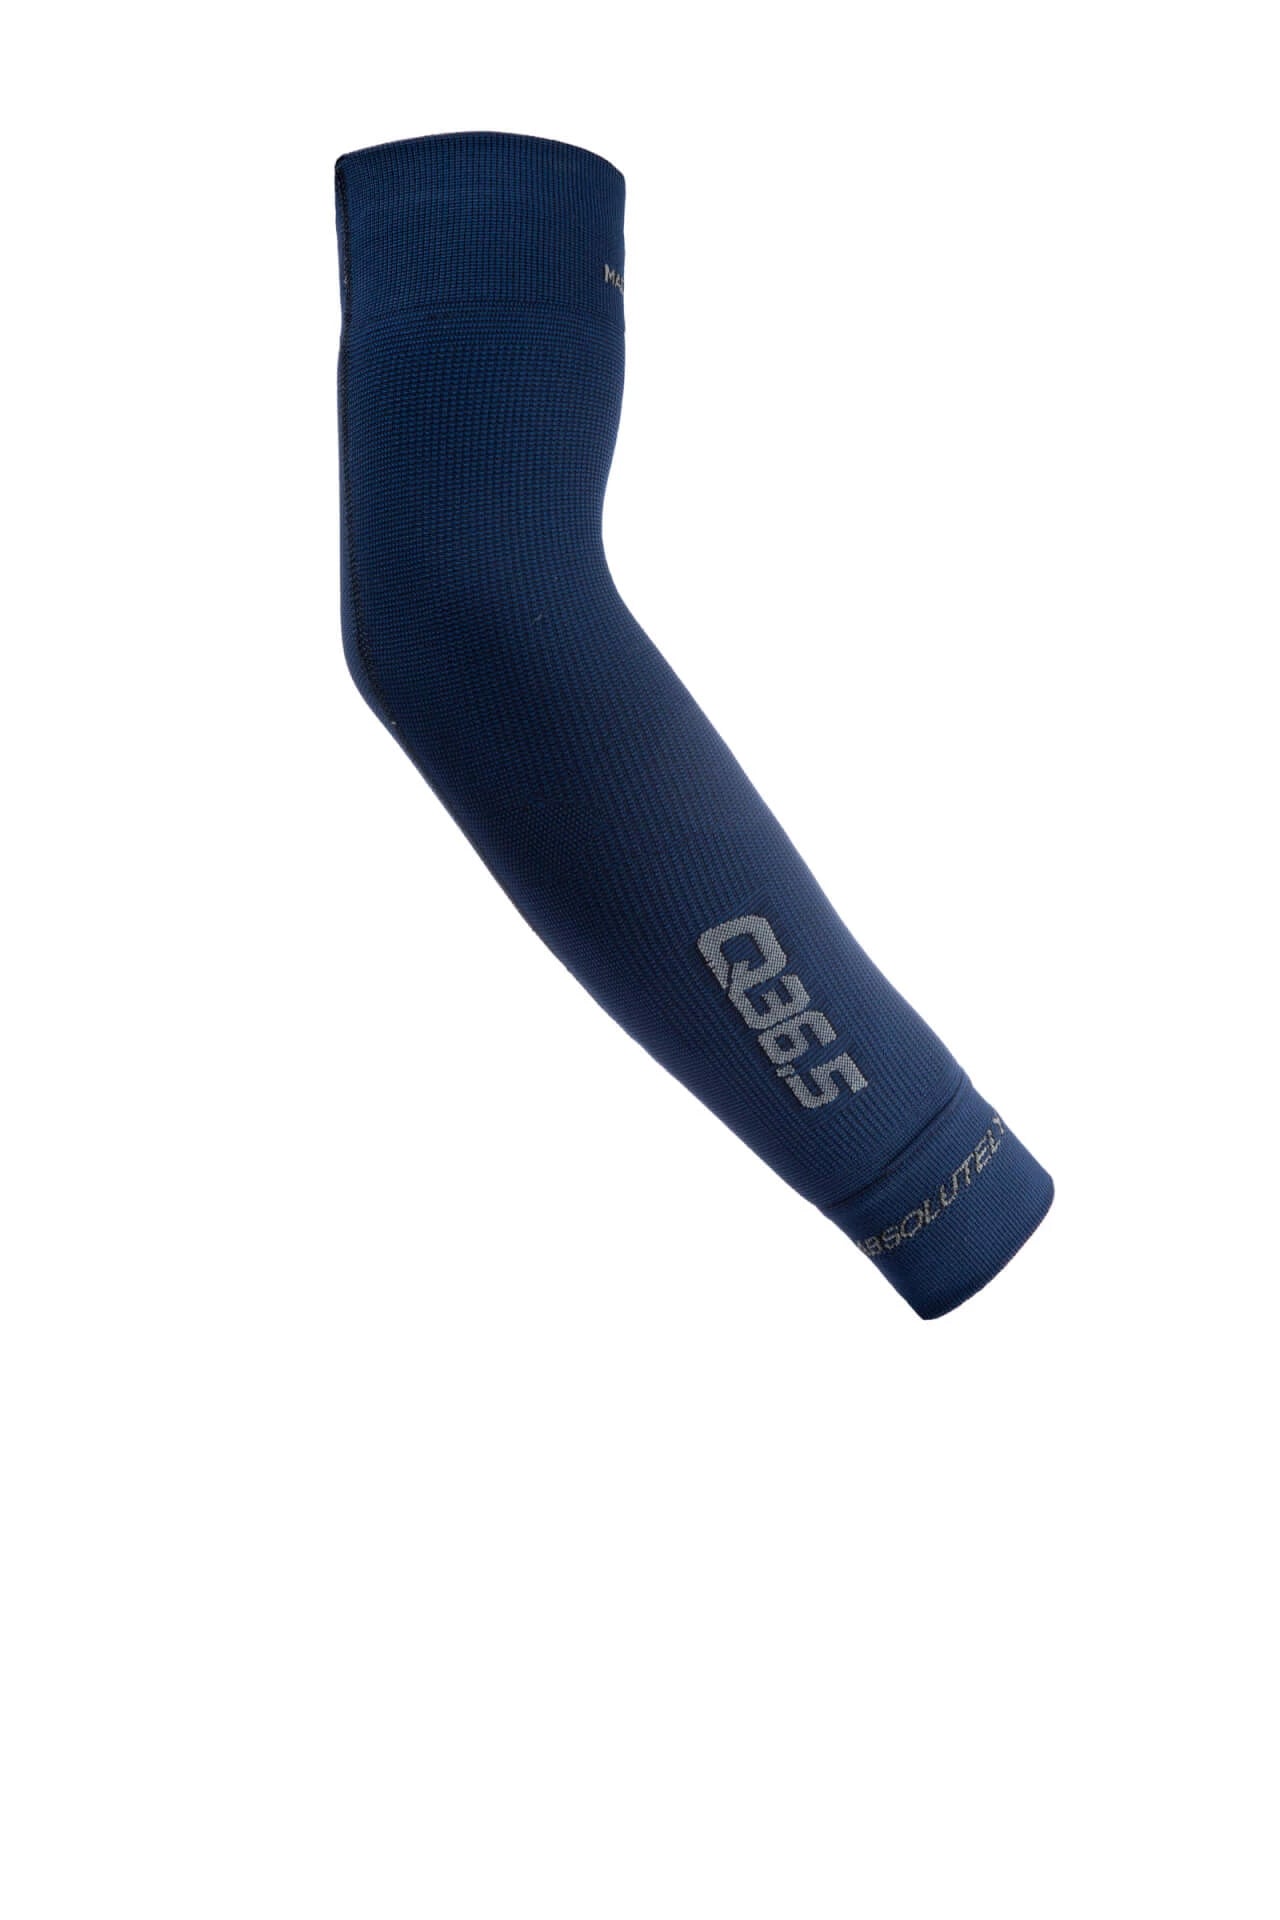 The Side of A Q36.5 Sun&Air Arm Warmer in Navy with Q36.5 reflective branding